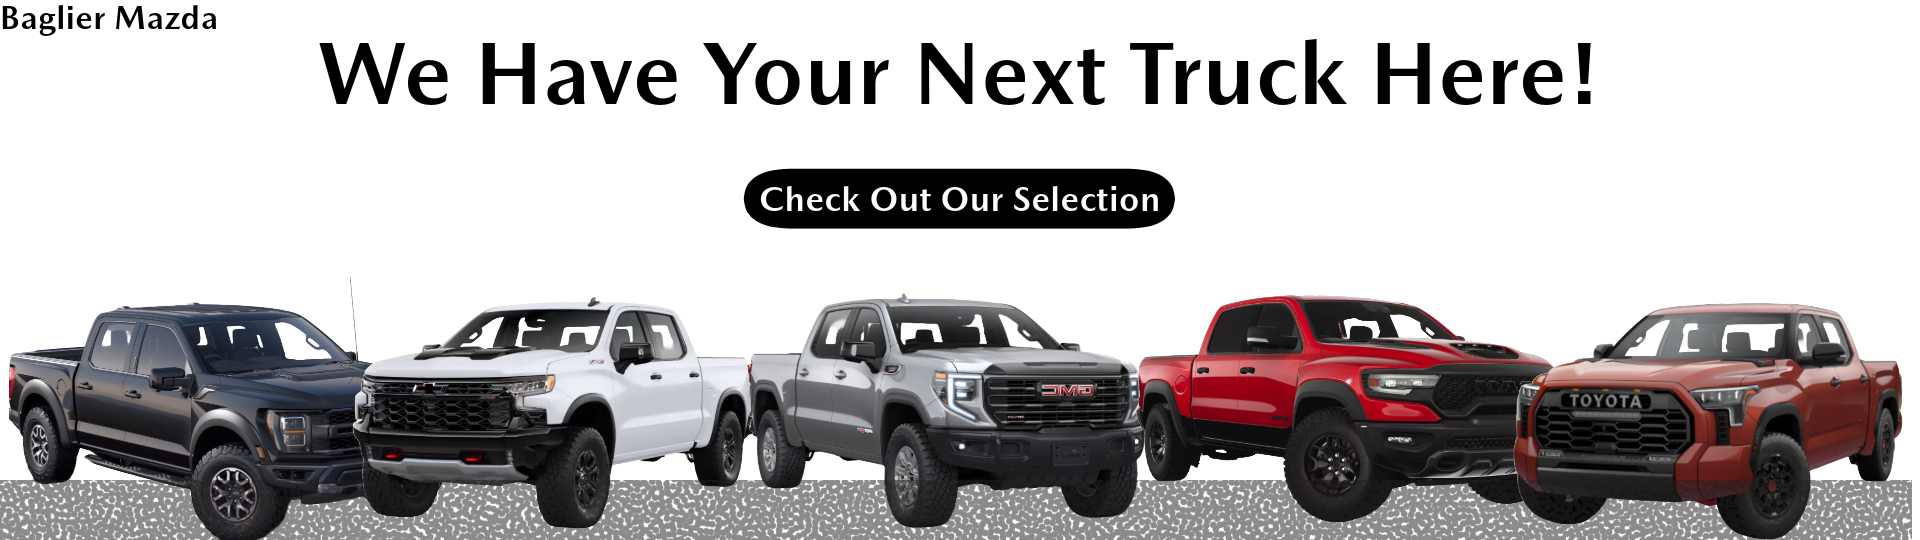 Used truck selection